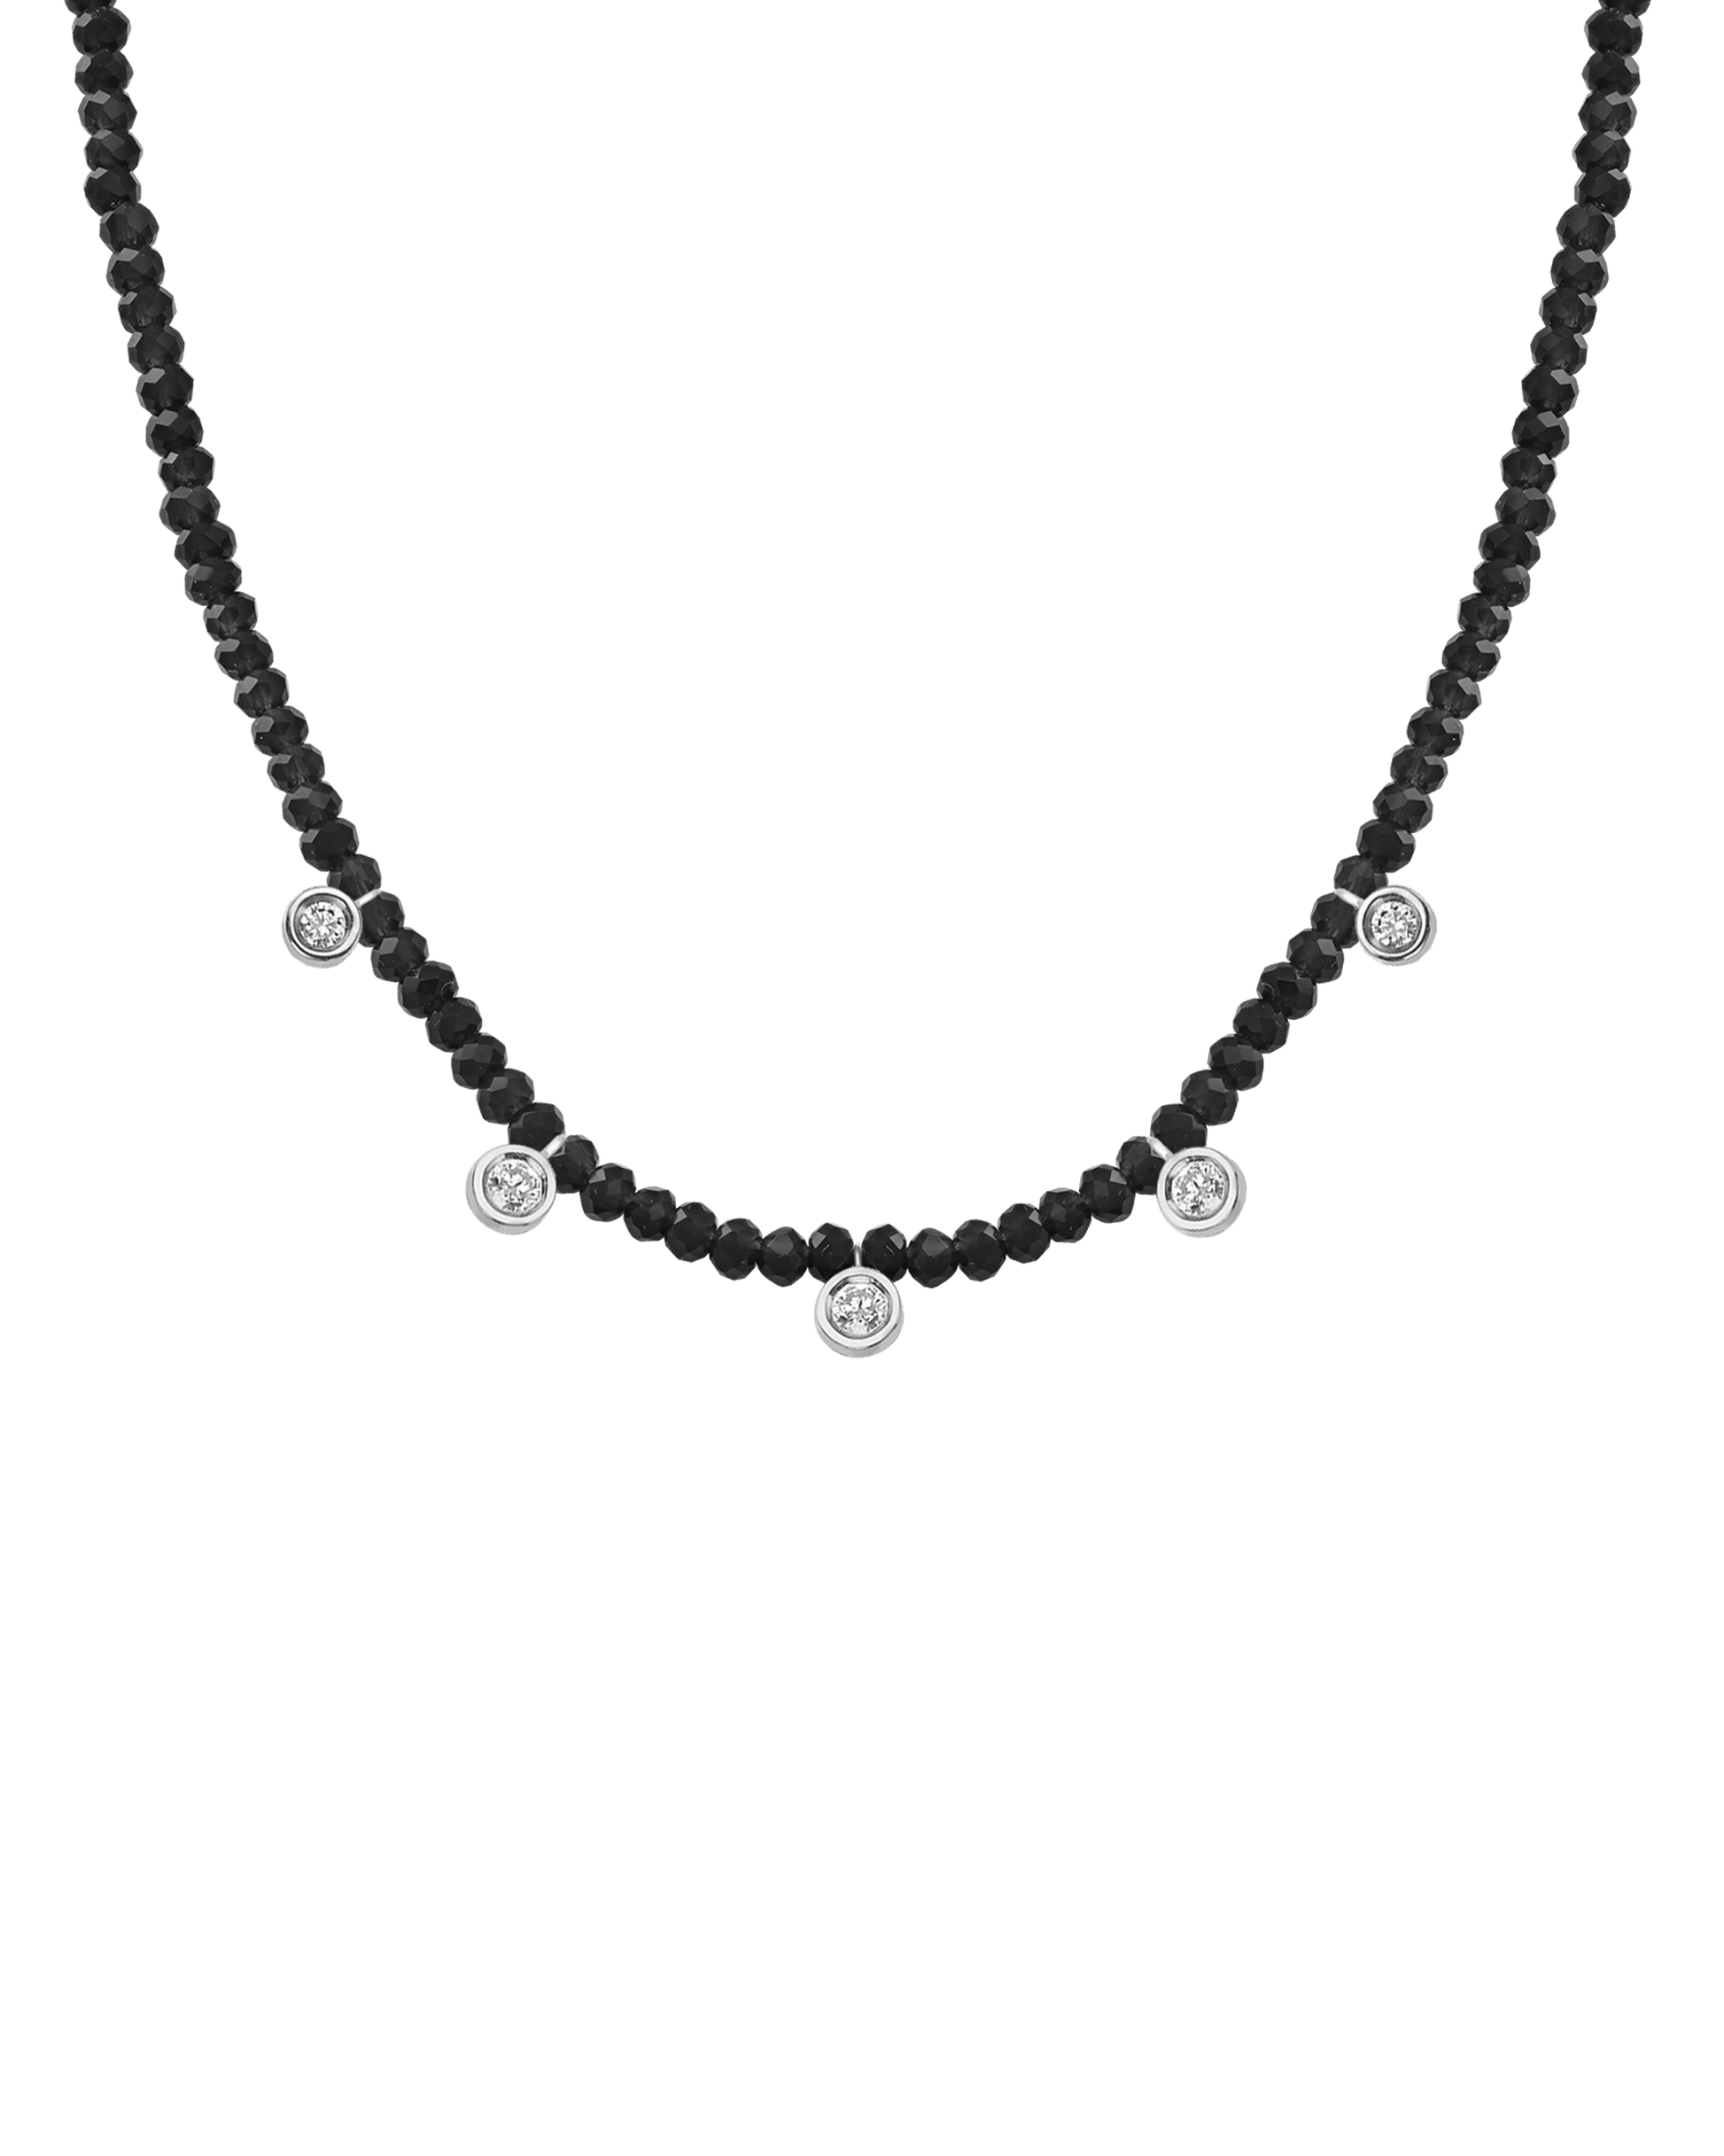 Emerald Gemstone & Five diamonds Necklace - 14K White Gold Necklaces magal-dev Glass Beads Black Spinnel 14" - Collar 